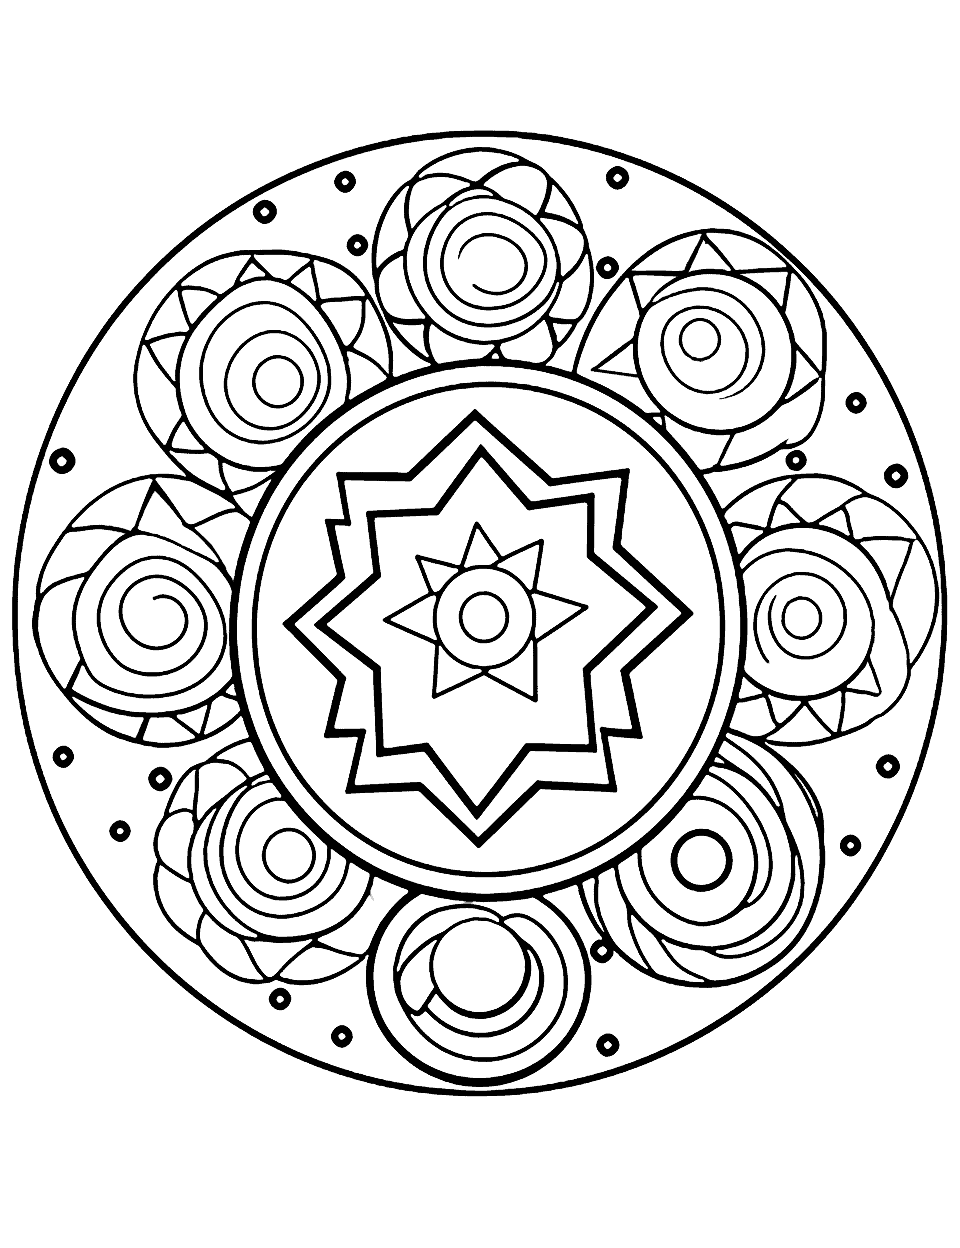 Delicious Donuts Mandala Coloring Page - A fun, appetizing mandala filled with various types of donuts, sprinkles, and pastries.